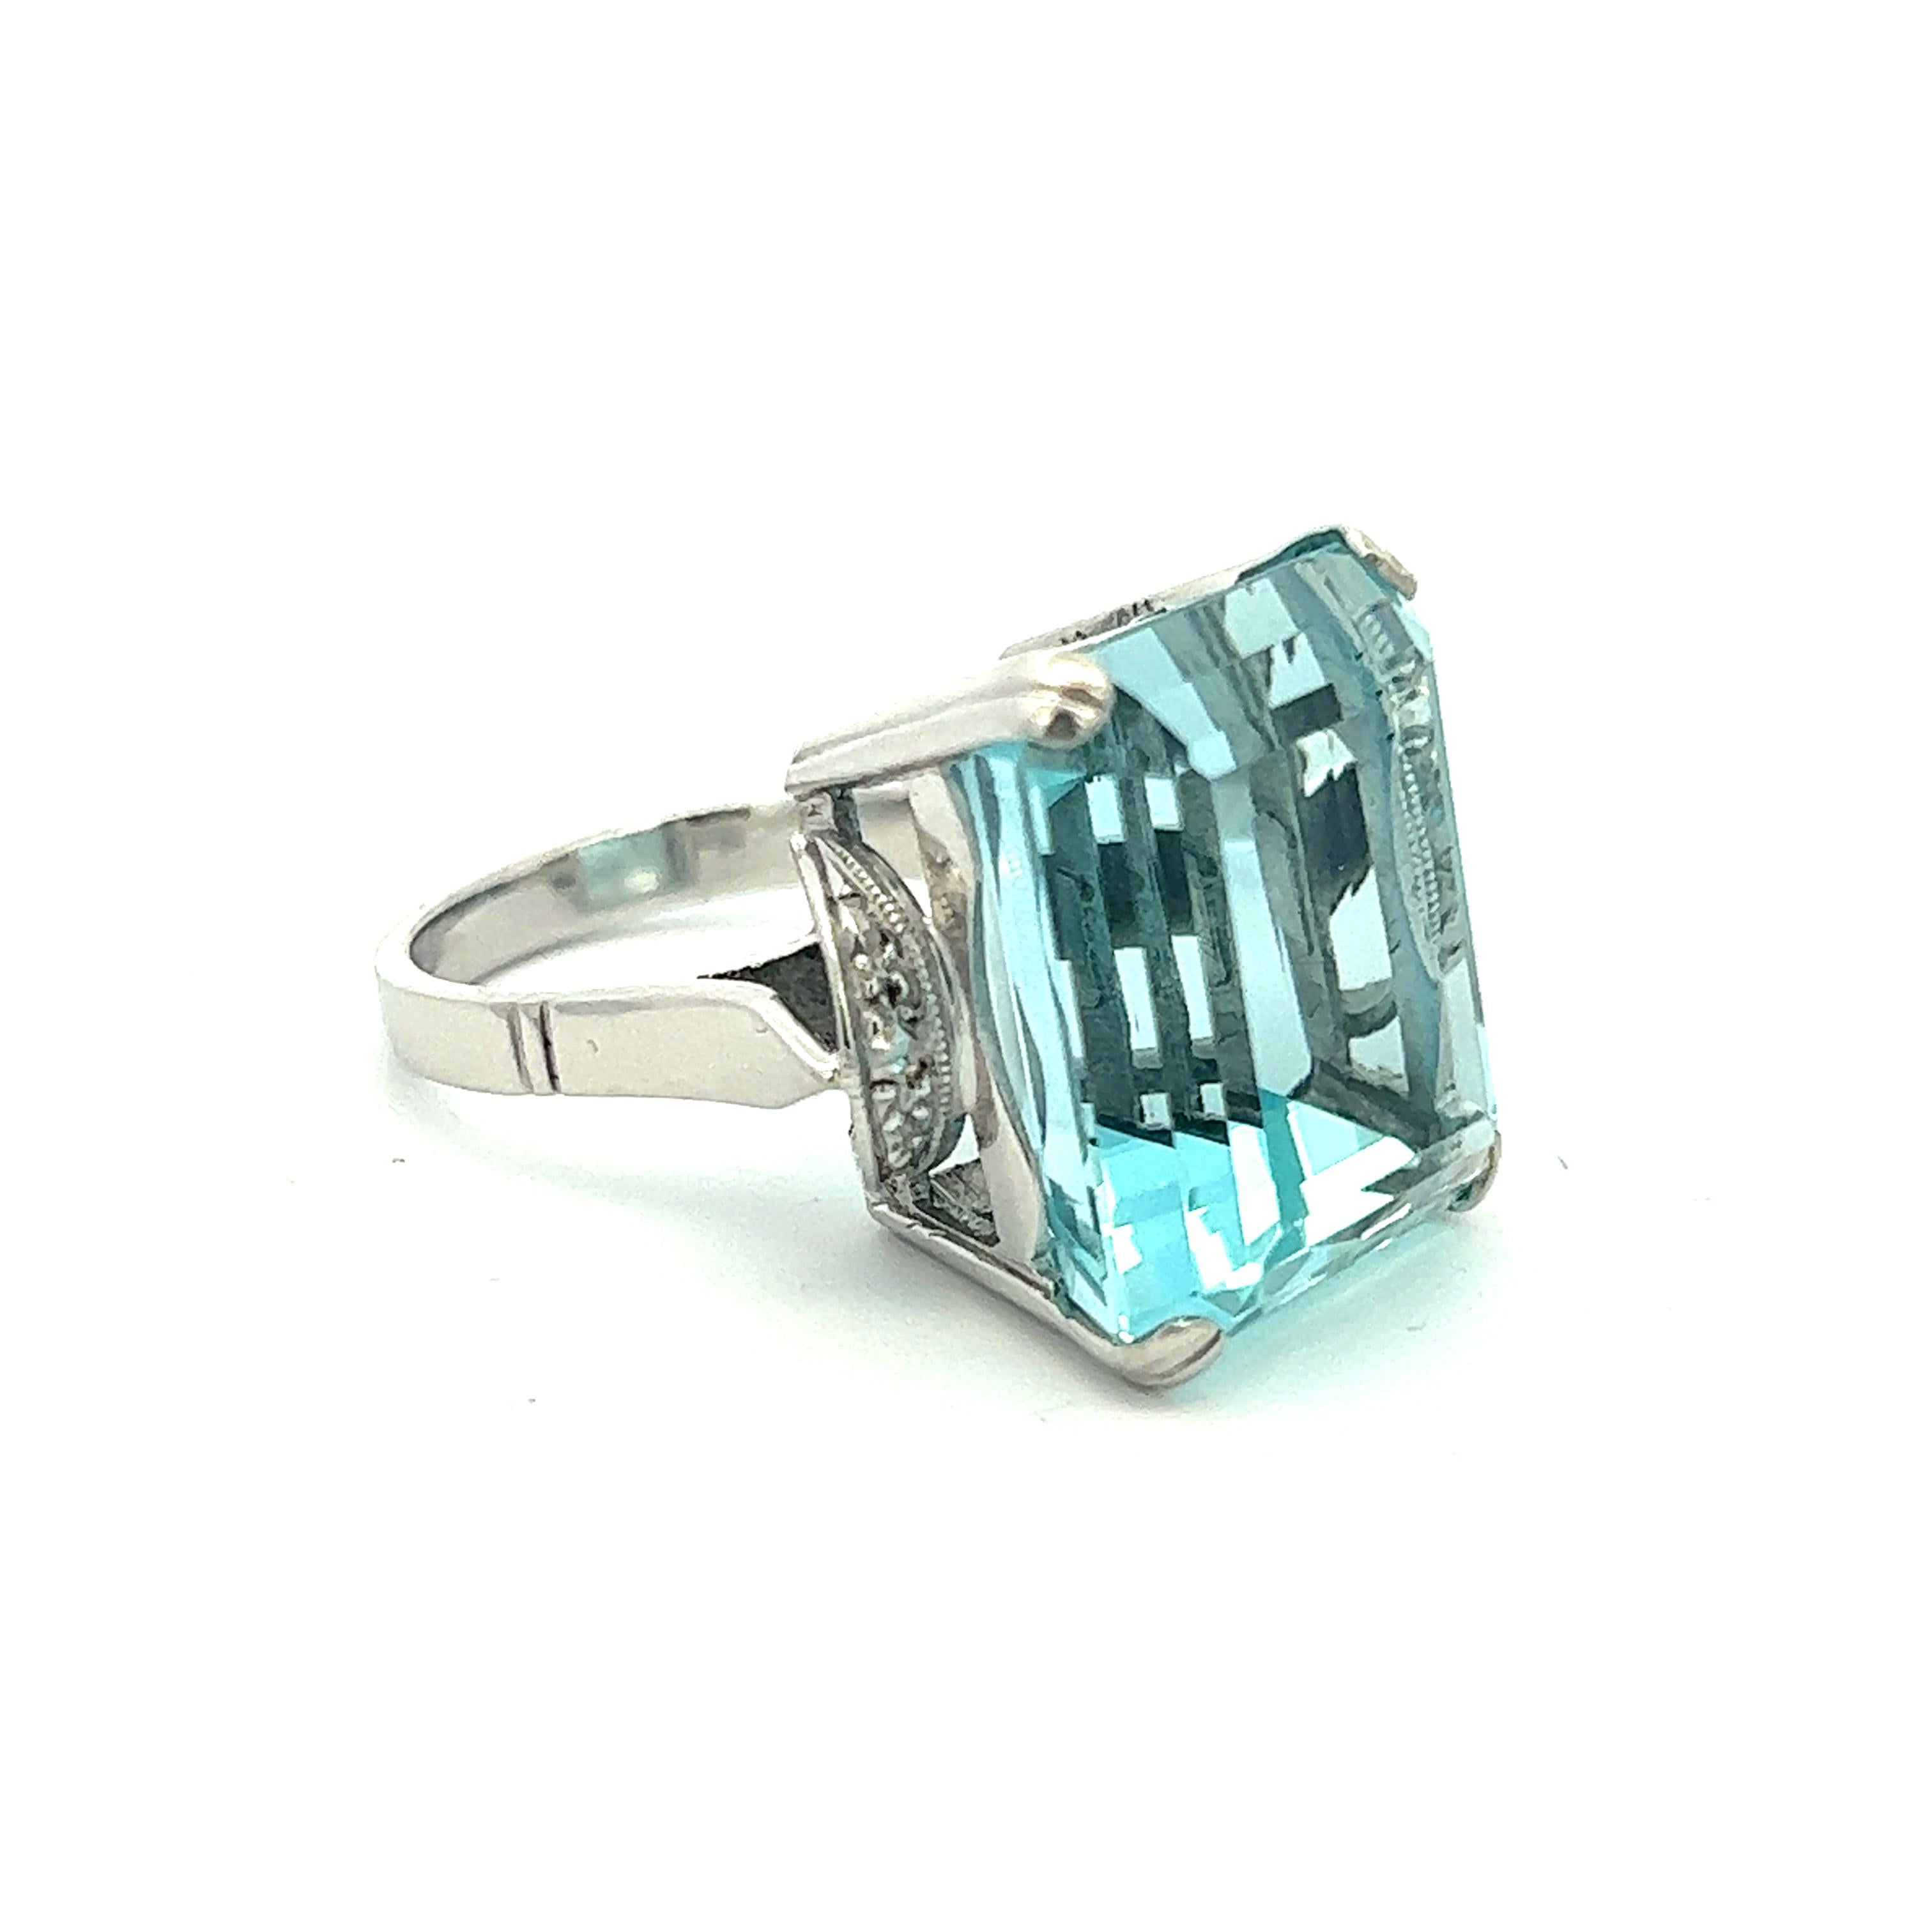 Emerald Cut 25.3ct GIA Certified Aquamarine Cocktail Ring For Sale